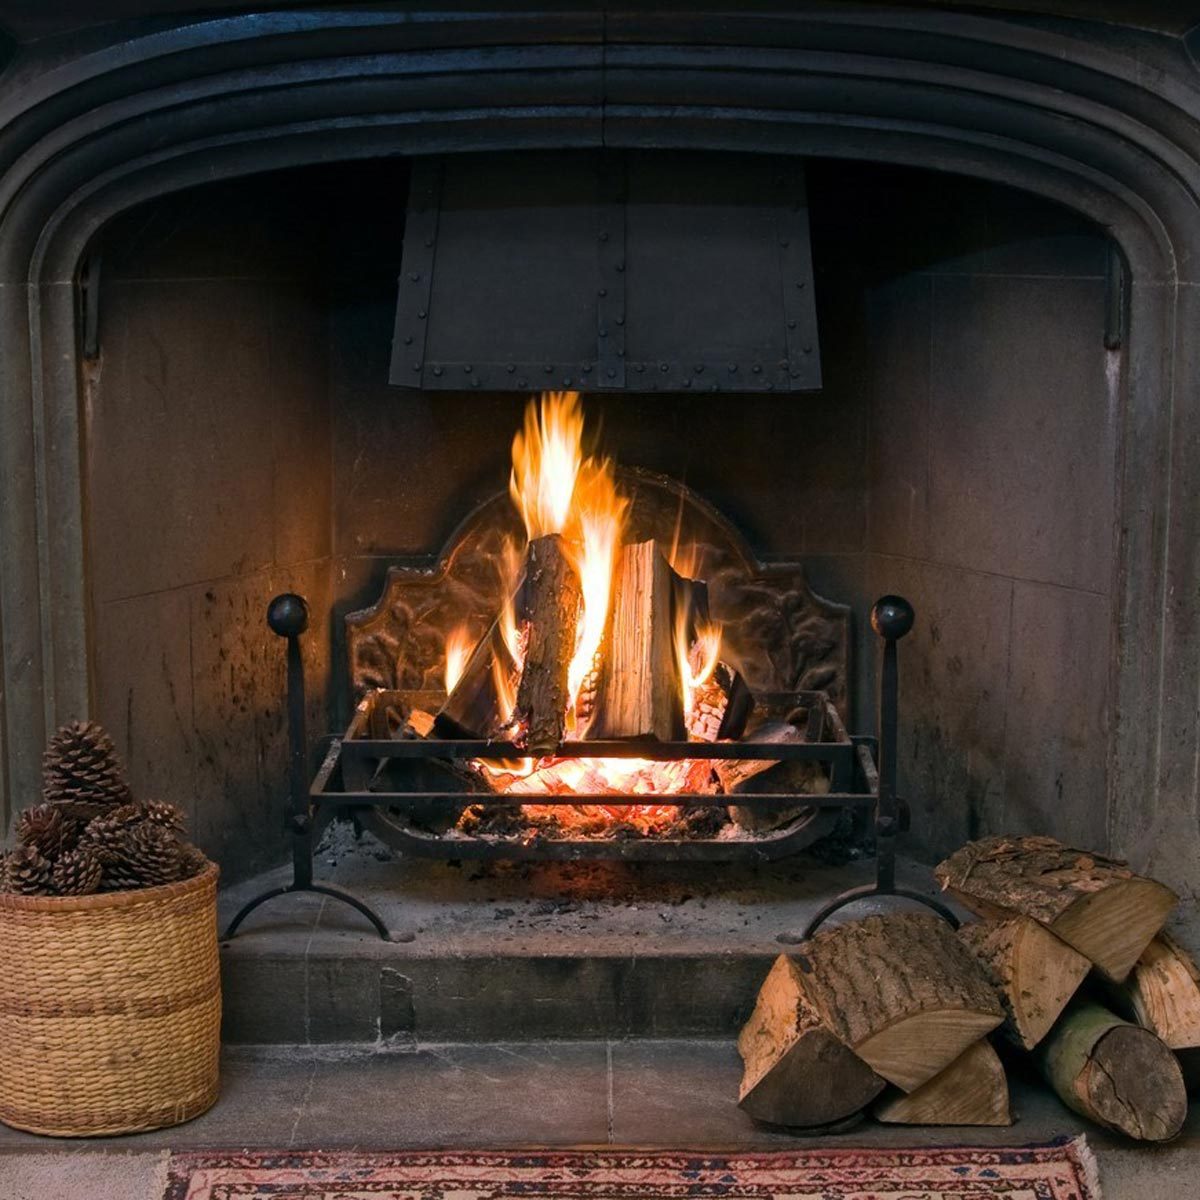 fire within a large stone arched fireplace, with pile of logs and basket of pine kernels fireplace fire